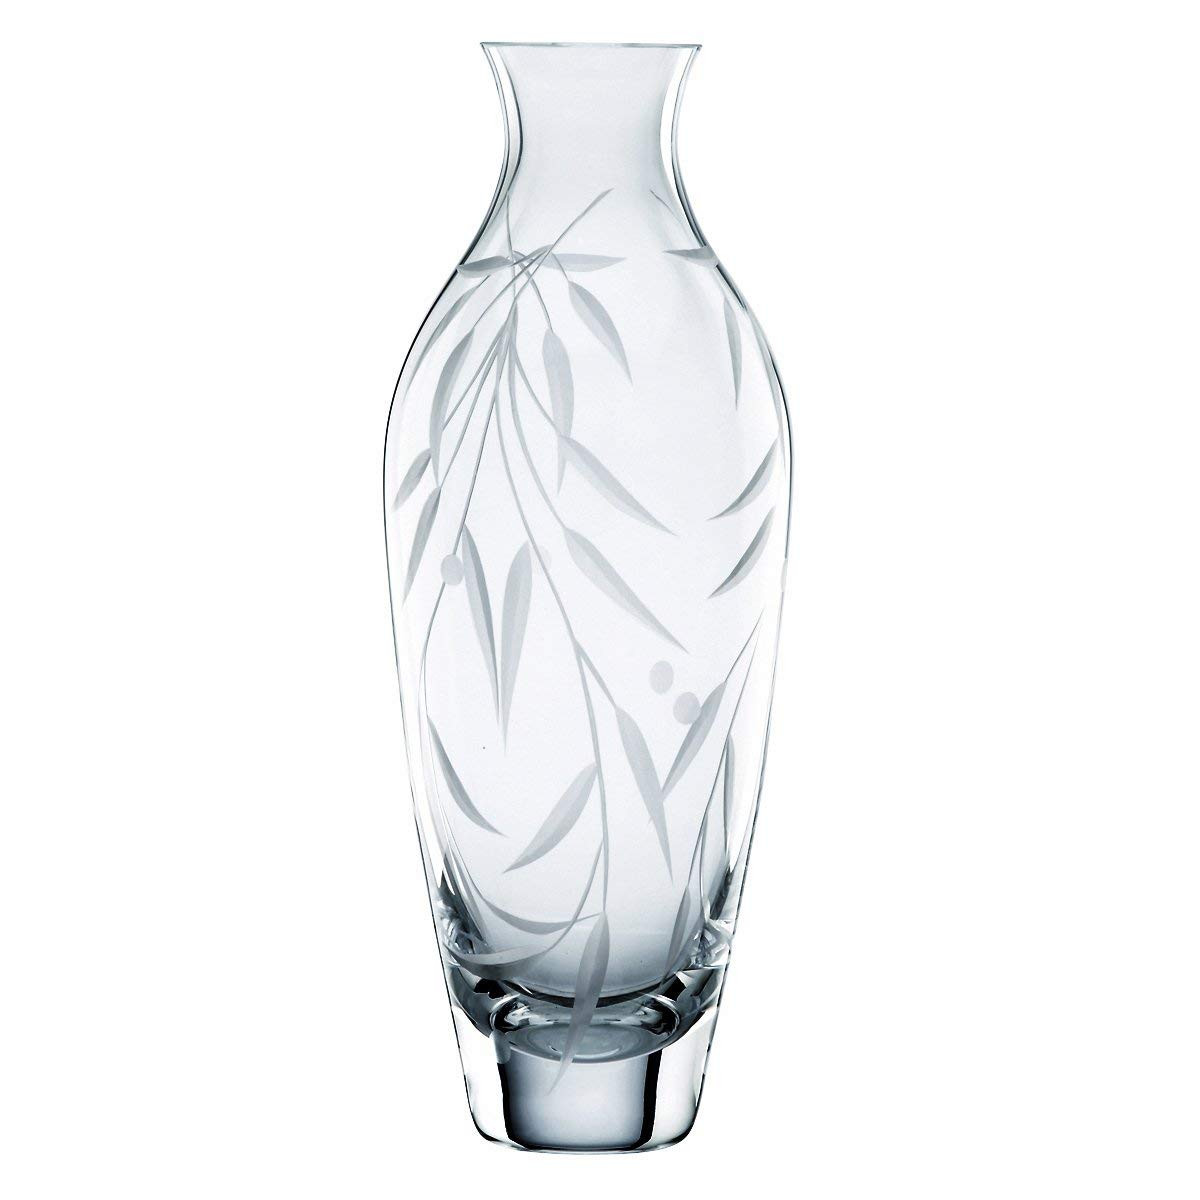 27 Trendy Waterford Giftology Lismore Candy Bud Vase 2024 free download waterford giftology lismore candy bud vase of amazon com lenox opal innocence crystal bud vase home kitchen within 610apullewl sl1200